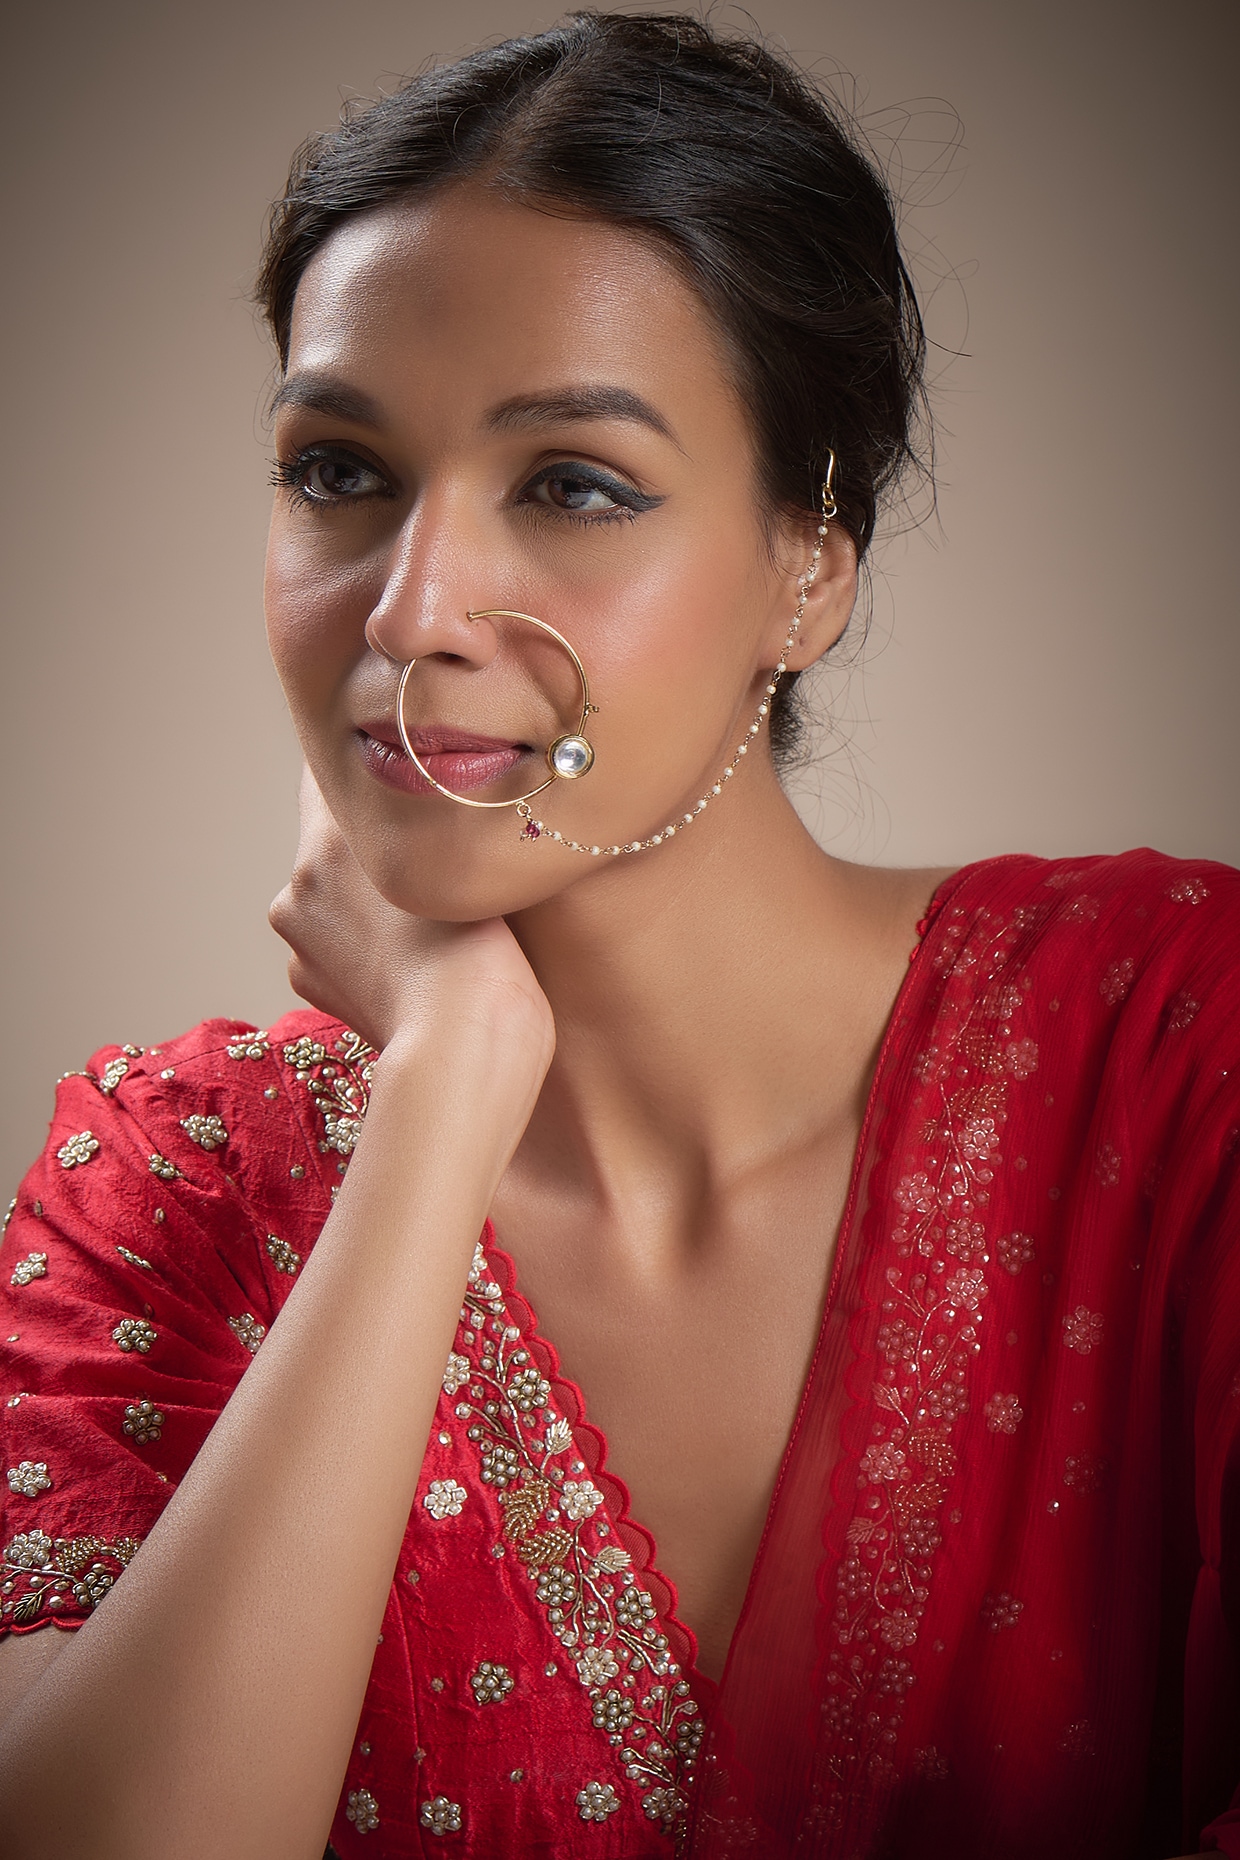 Shashvat Jewels Sania Mirza Fashion Diamond Gold Nose Ring Price in India -  Buy Shashvat Jewels Sania Mirza Fashion Diamond Gold Nose Ring Online at  Best Prices in India | Flipkart.com